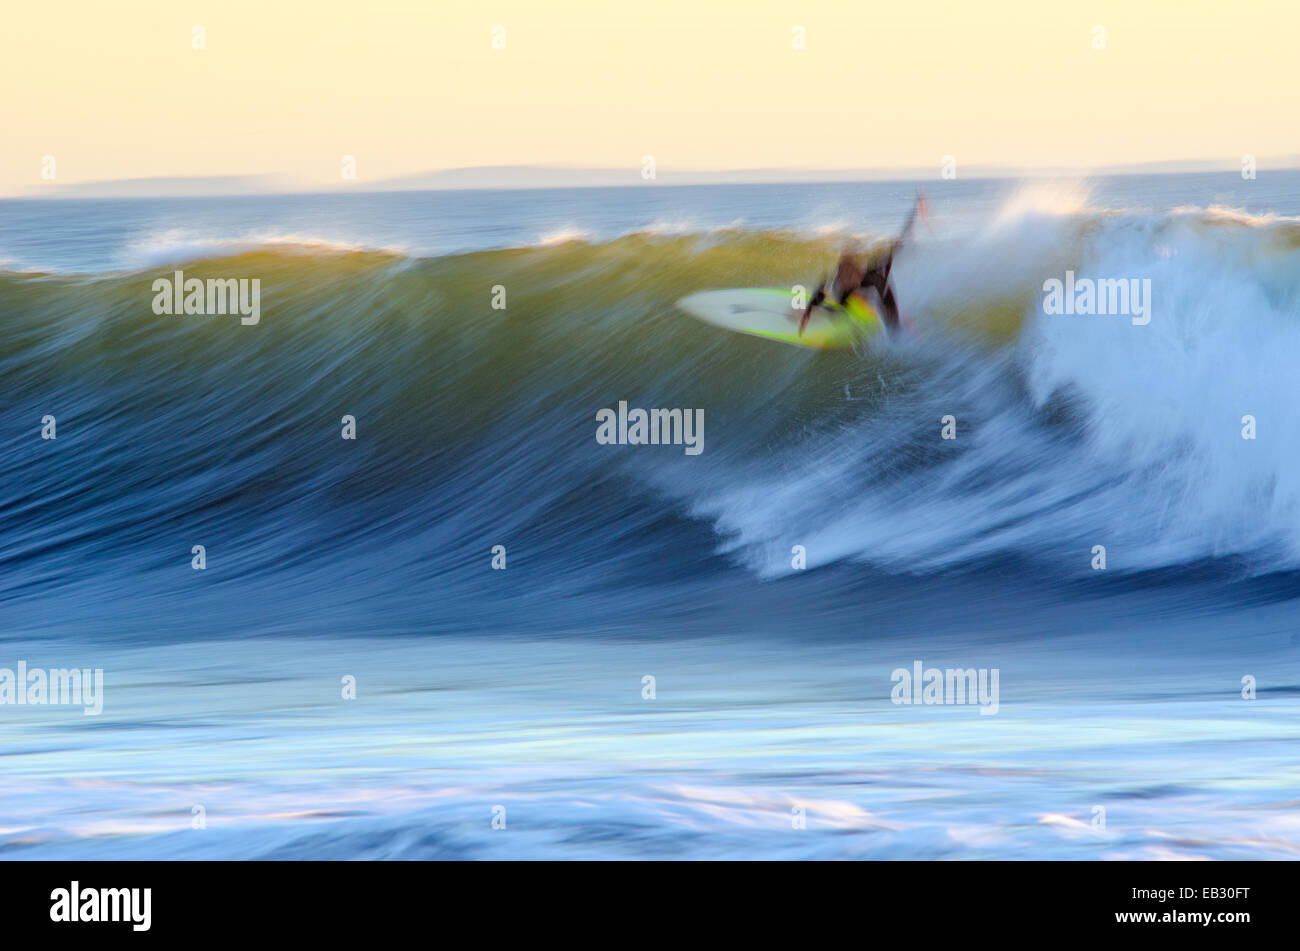 Motion blur of a surfer at dusk at Pitas Point in Ventura, California. Stock Photo